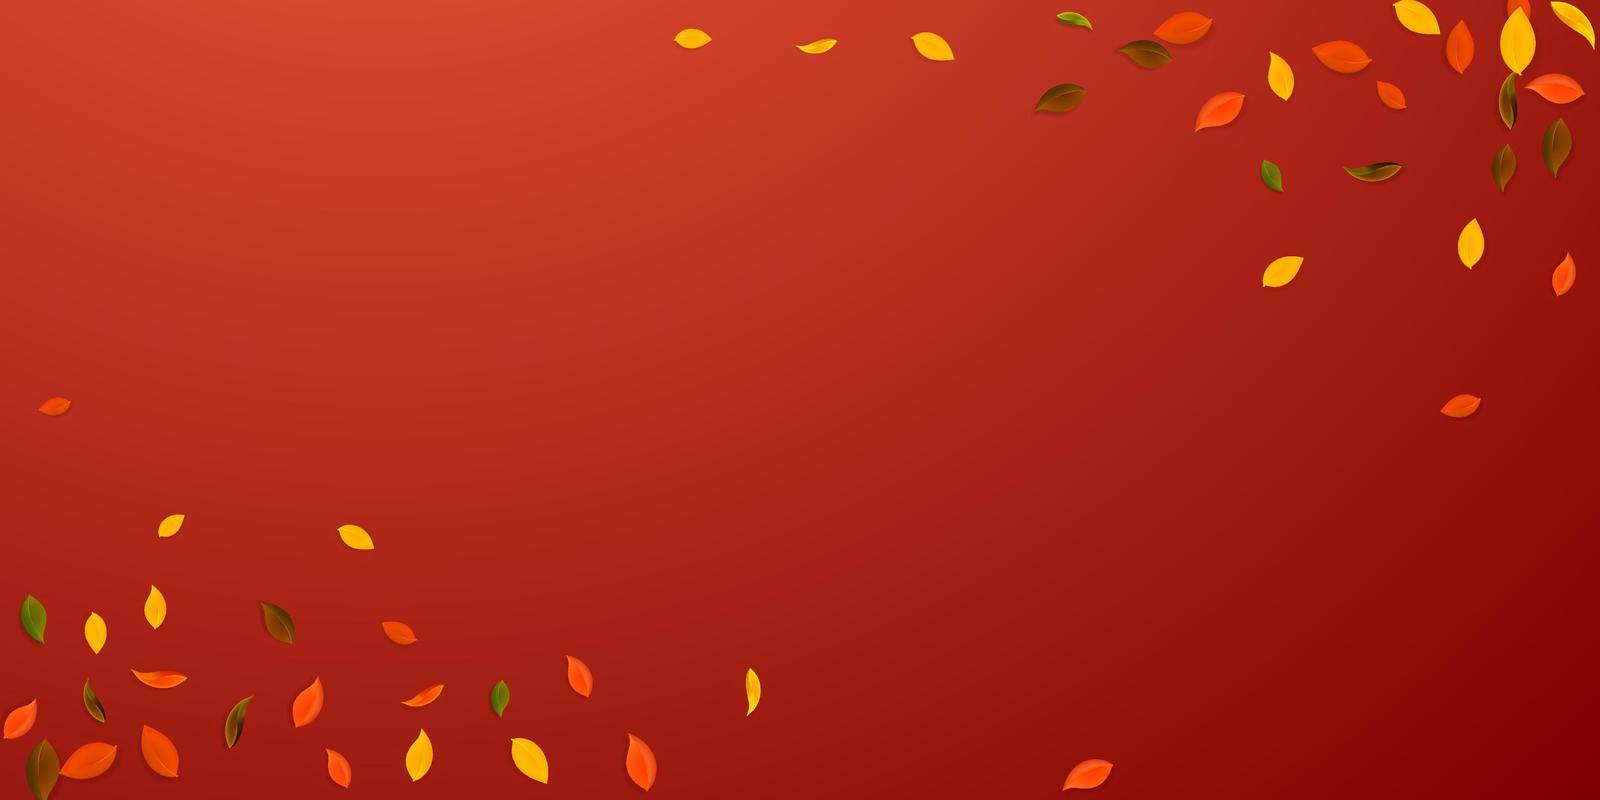 Falling autumn leaves. Red, yellow, green, brown chaotic leaves flying. Corners colorful foliage on attractive red background. Captivating back to school sale.